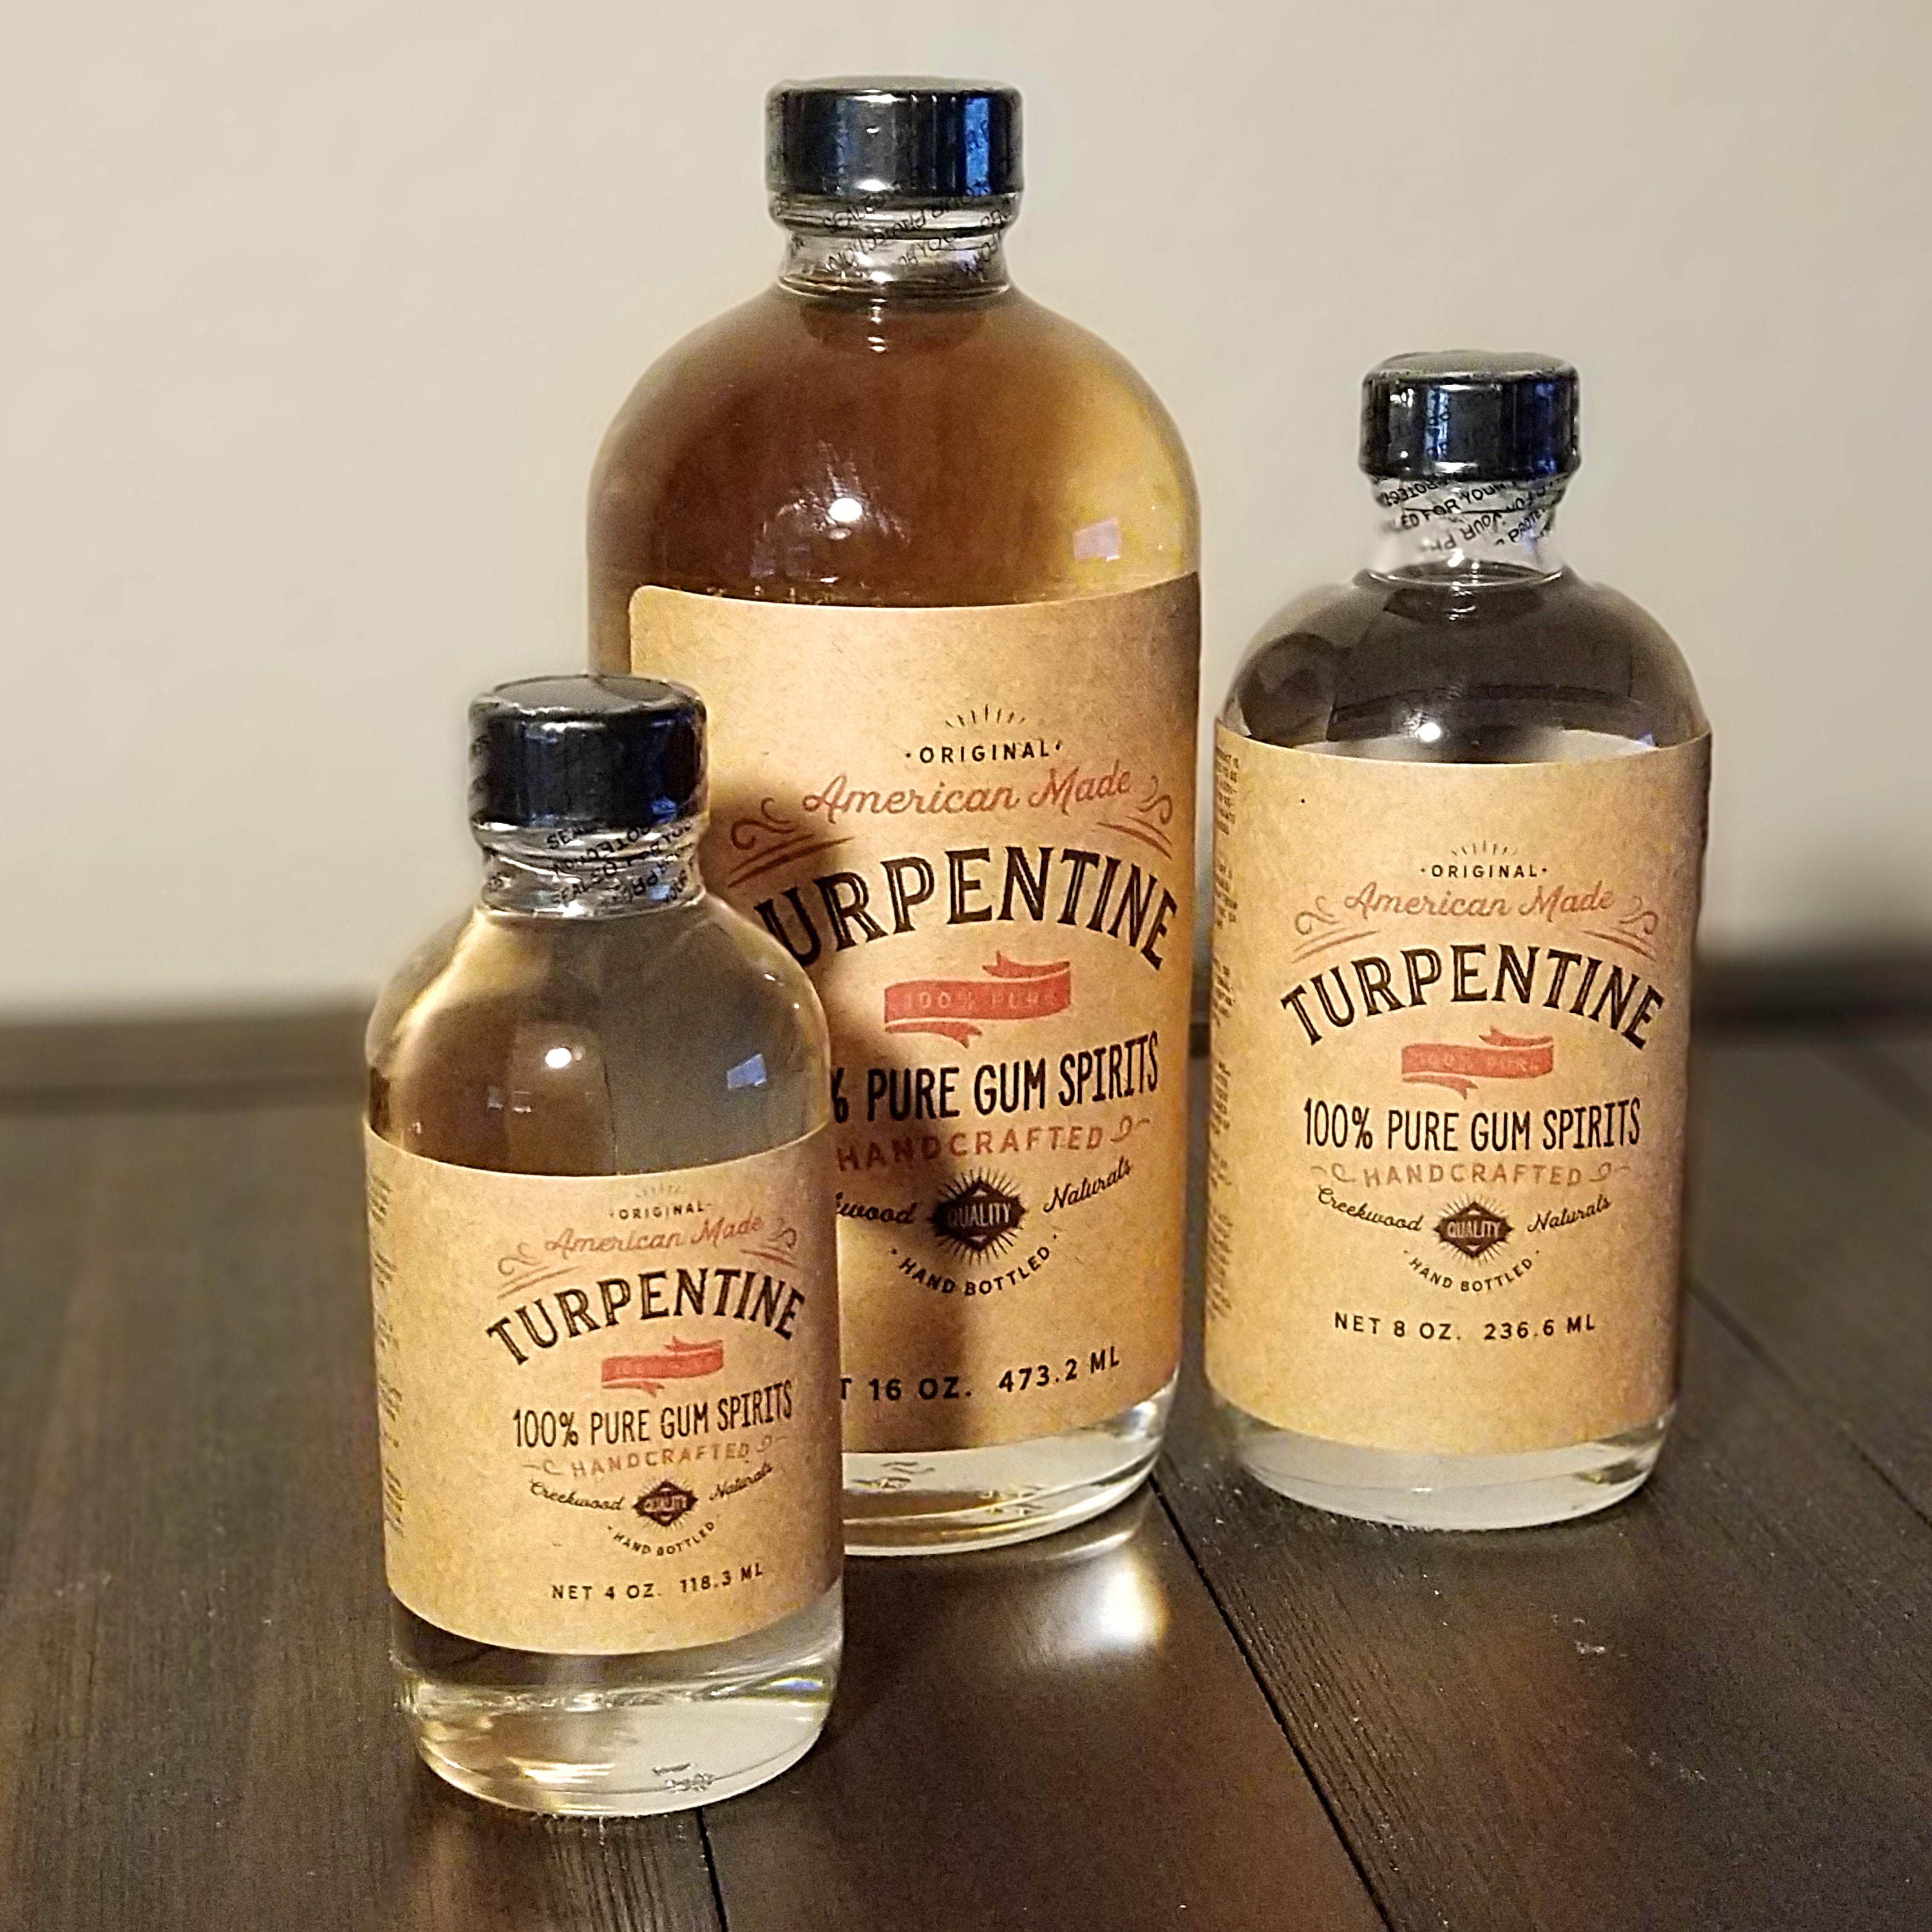 Case of 16 oz bottles of 100% Pure Gum Spirits of Turpentine